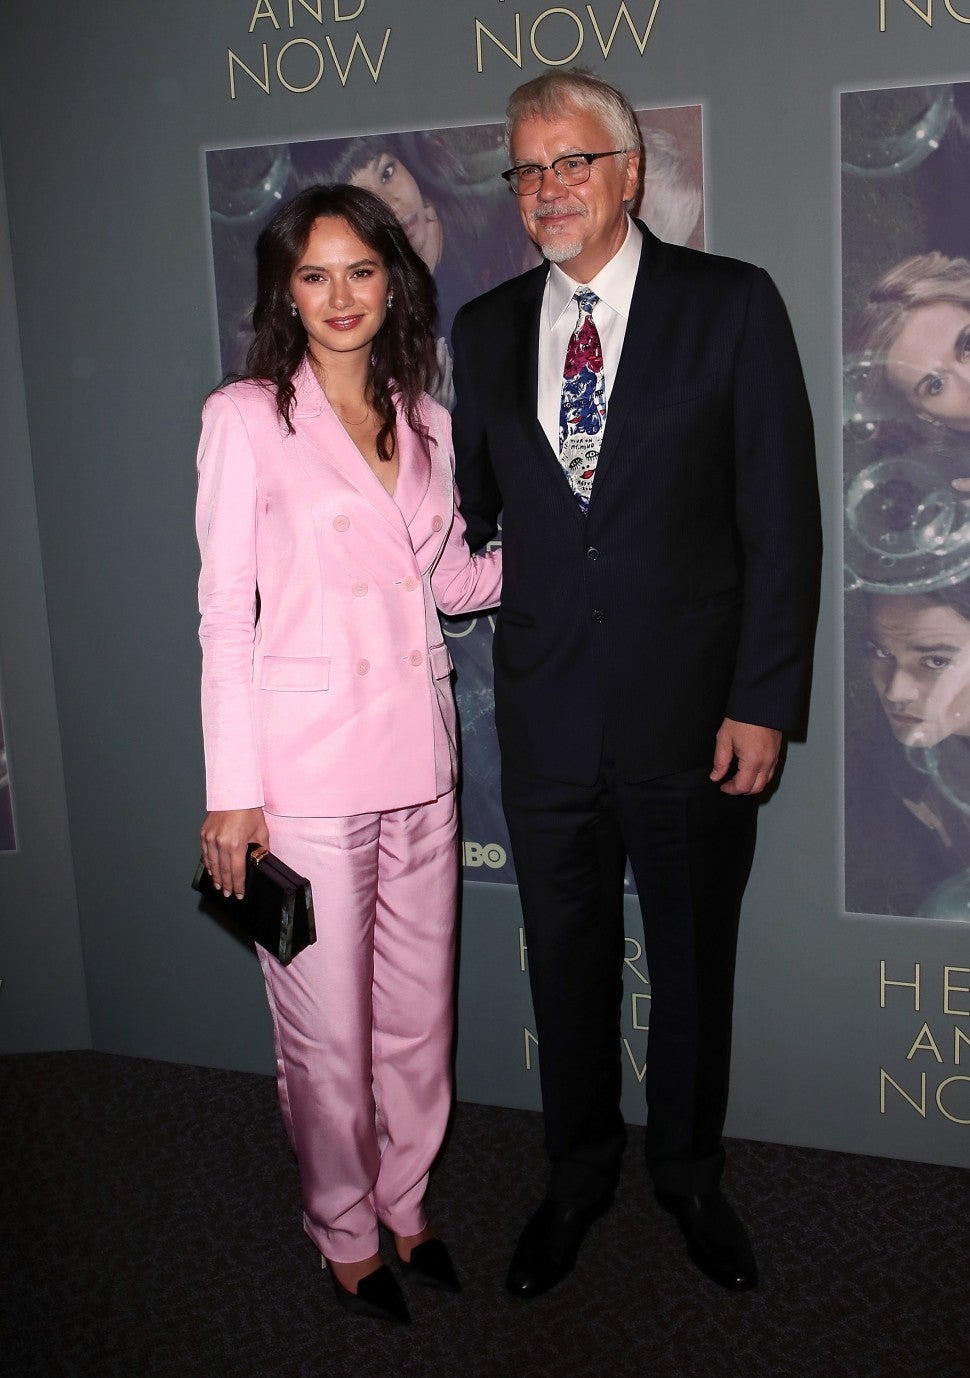 Gratiela Brancusi (L) and actor Tim Robbins attend the premiere of HBO's "Here and Now" at the Directors Guild of America on February 5, 2018 in Los Angeles, California. 